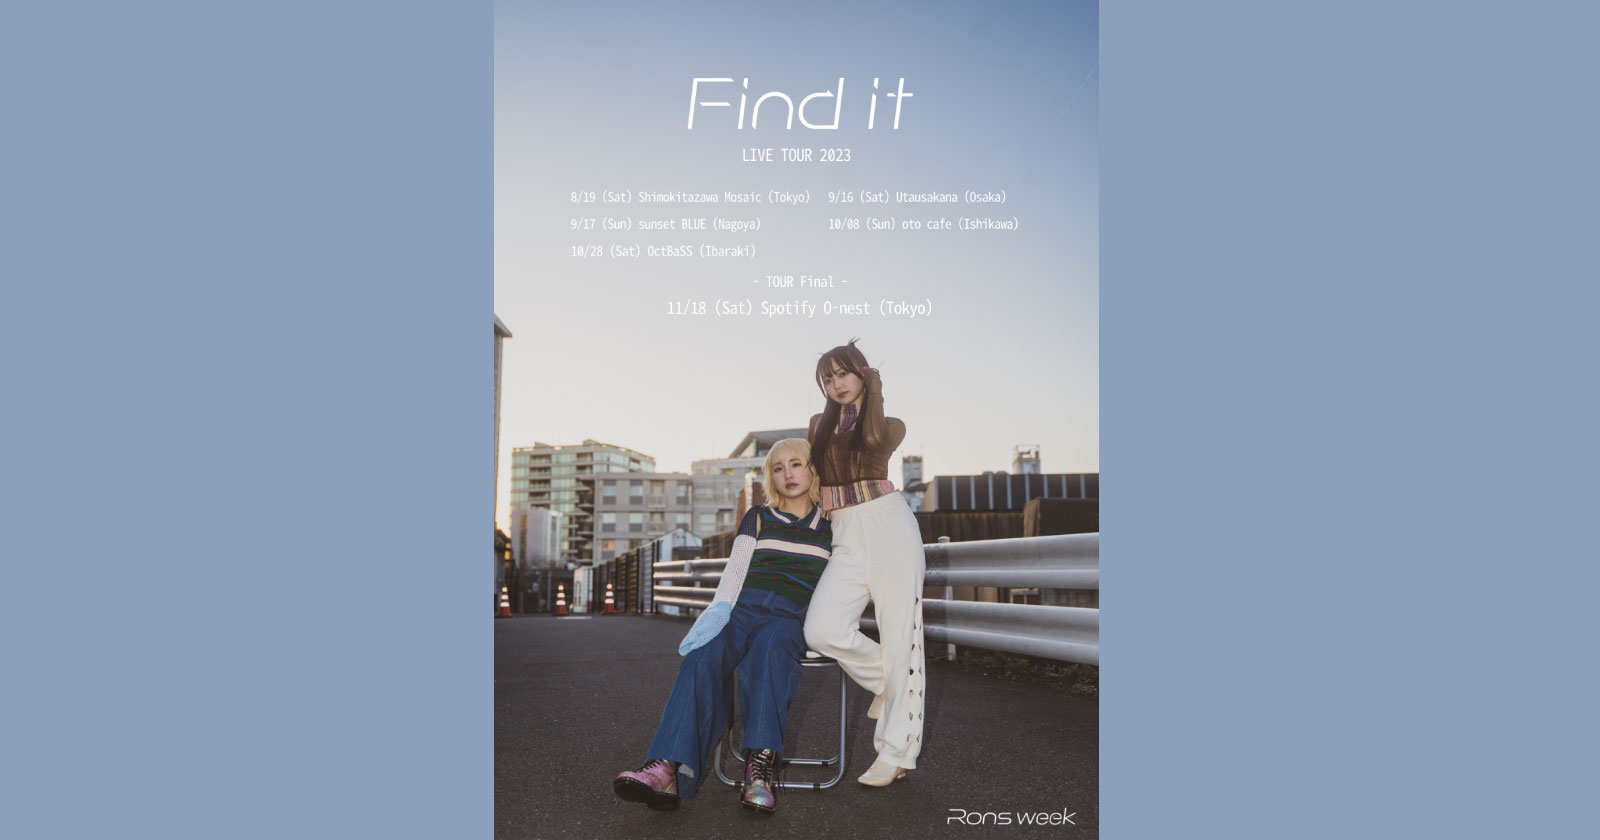 Rons week LIVE TOUR 2023 「 Find it 」